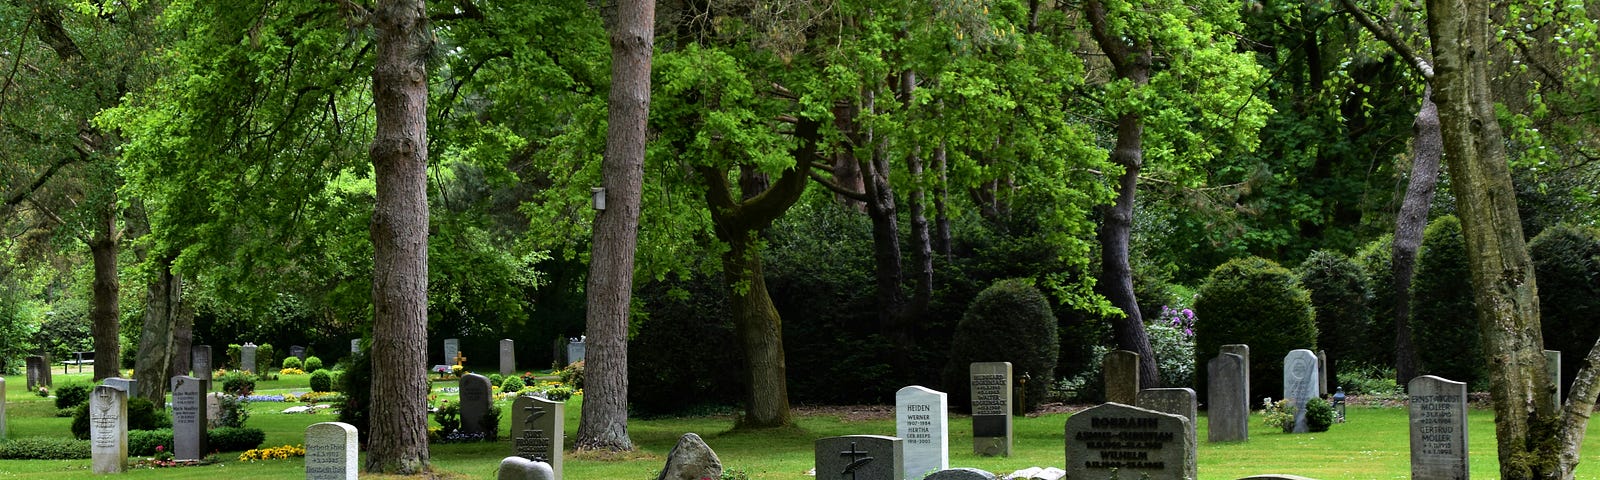 Beautifully kept cemetery, freshly mowed, cloudy day, extremely green grass and bushes around it.